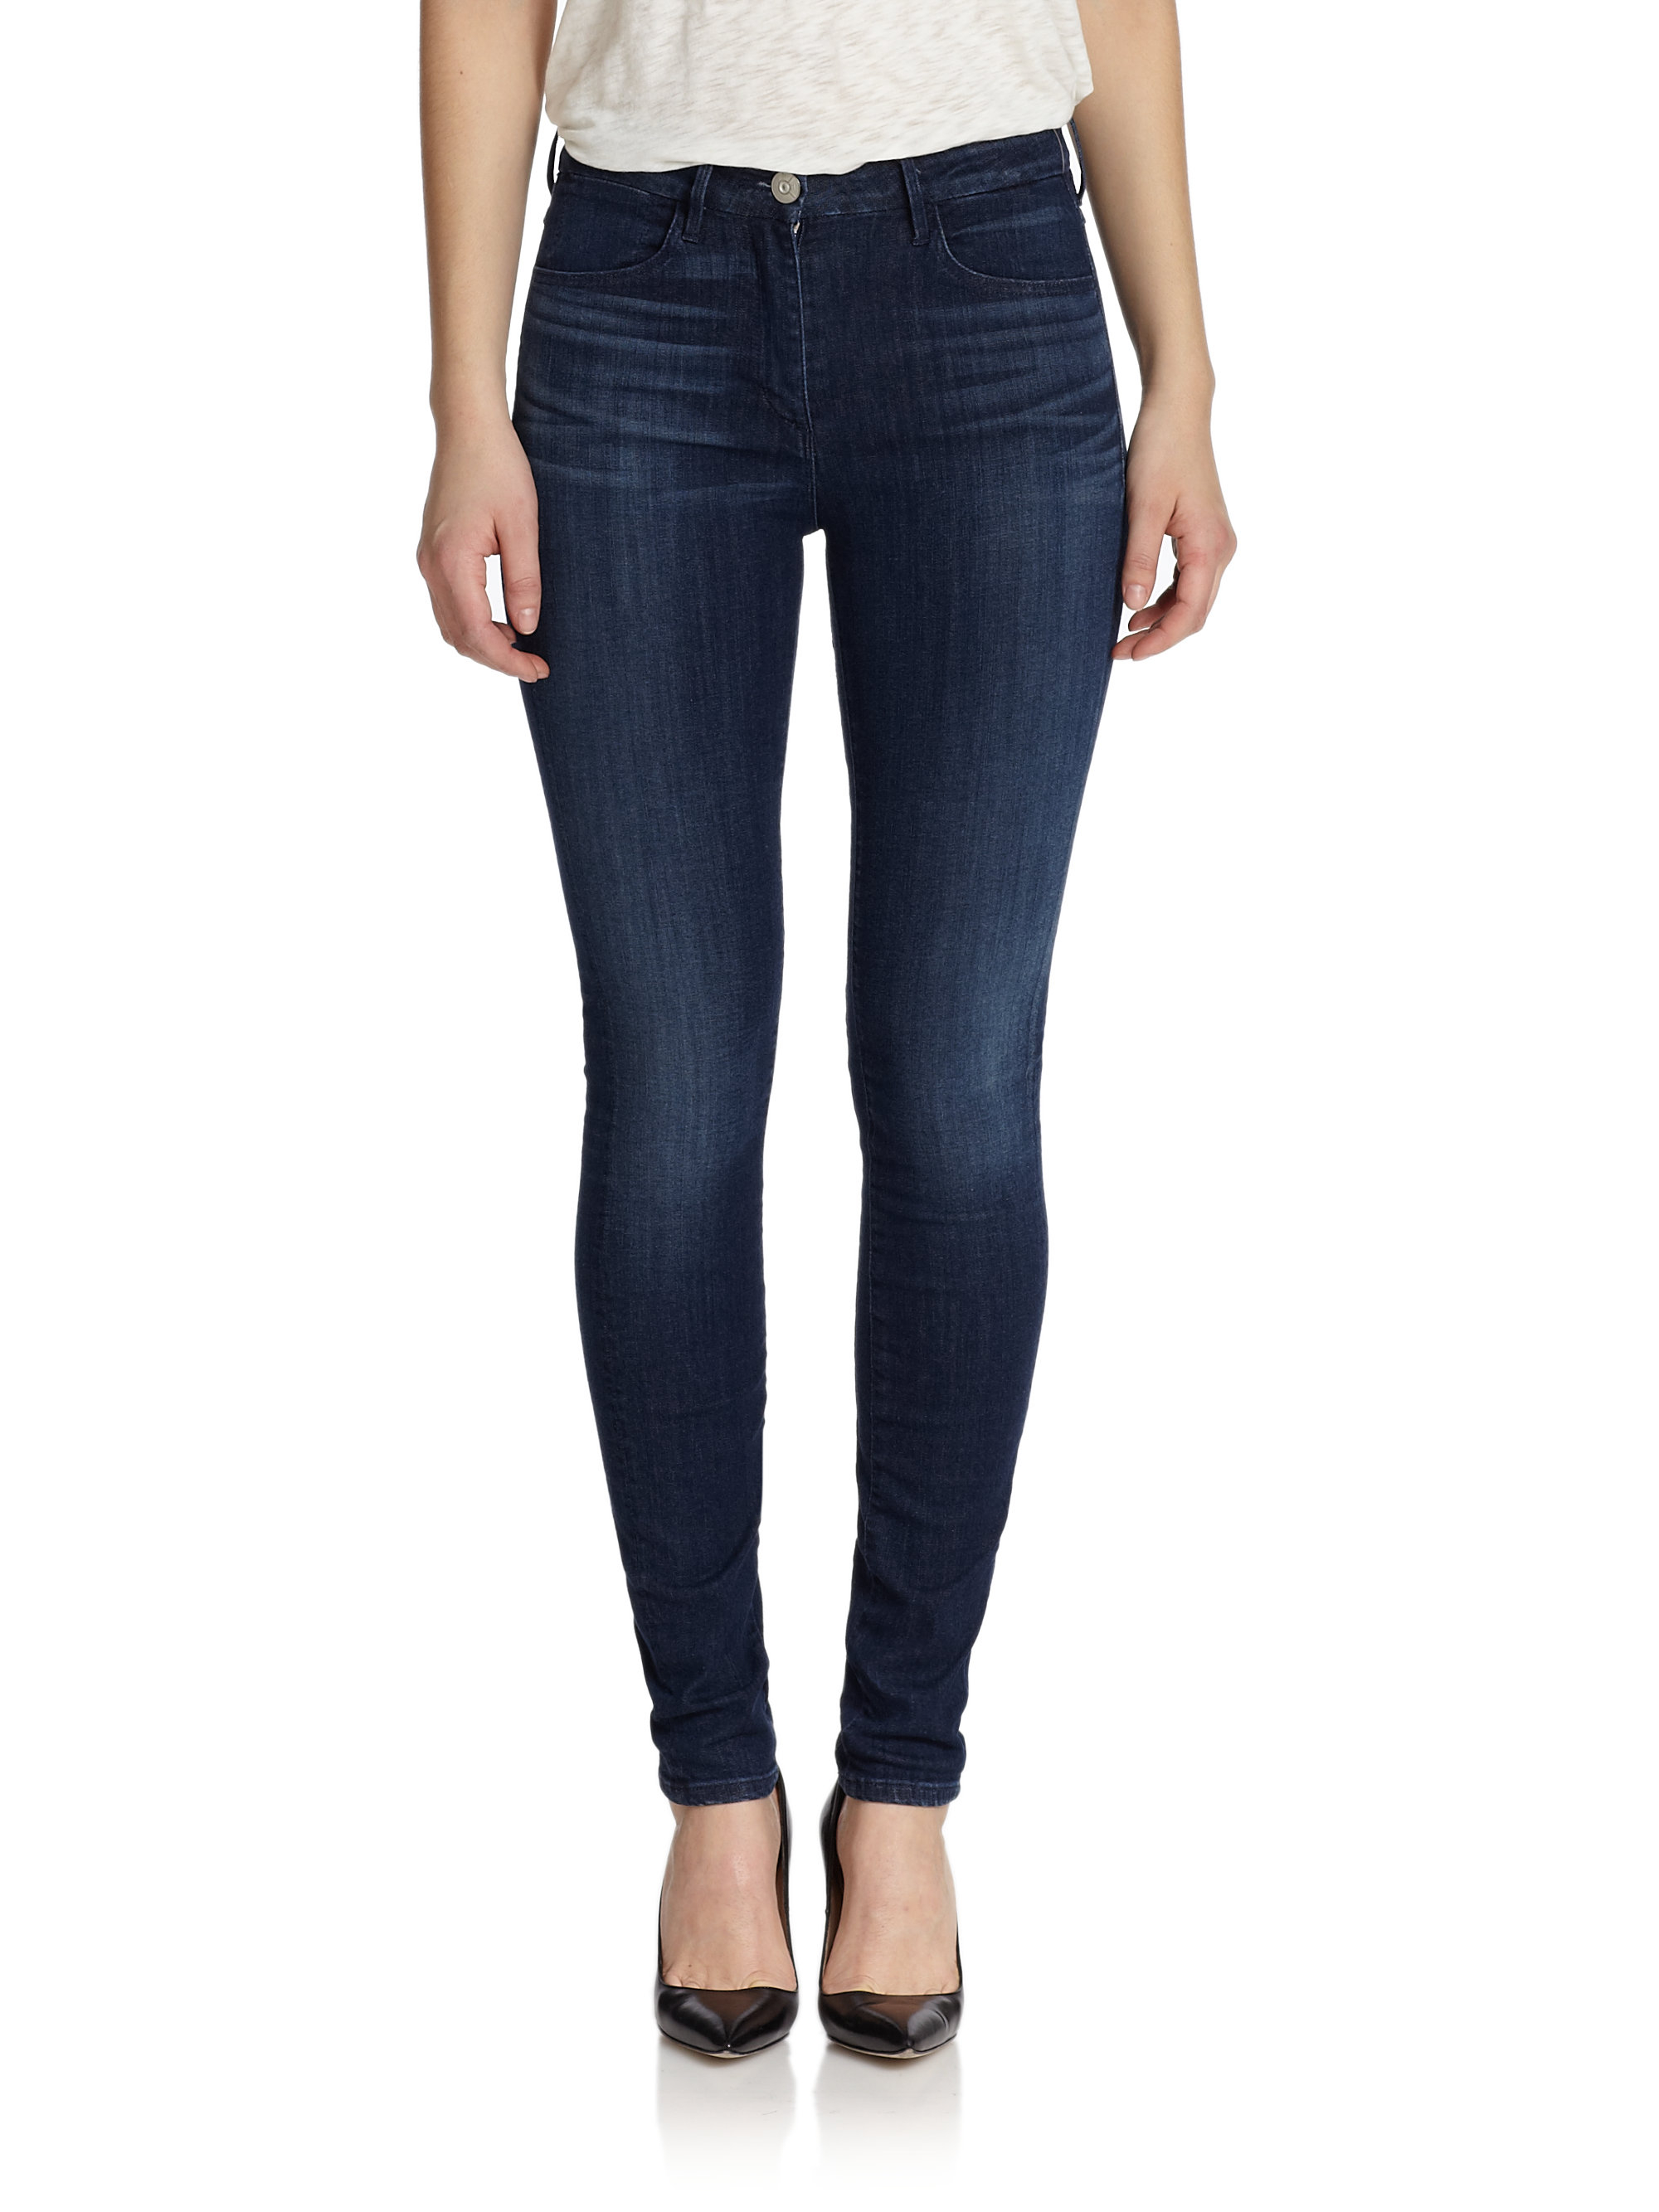 Lyst - 3X1 High-rise Channel Seam Skinny Jeans in Blue